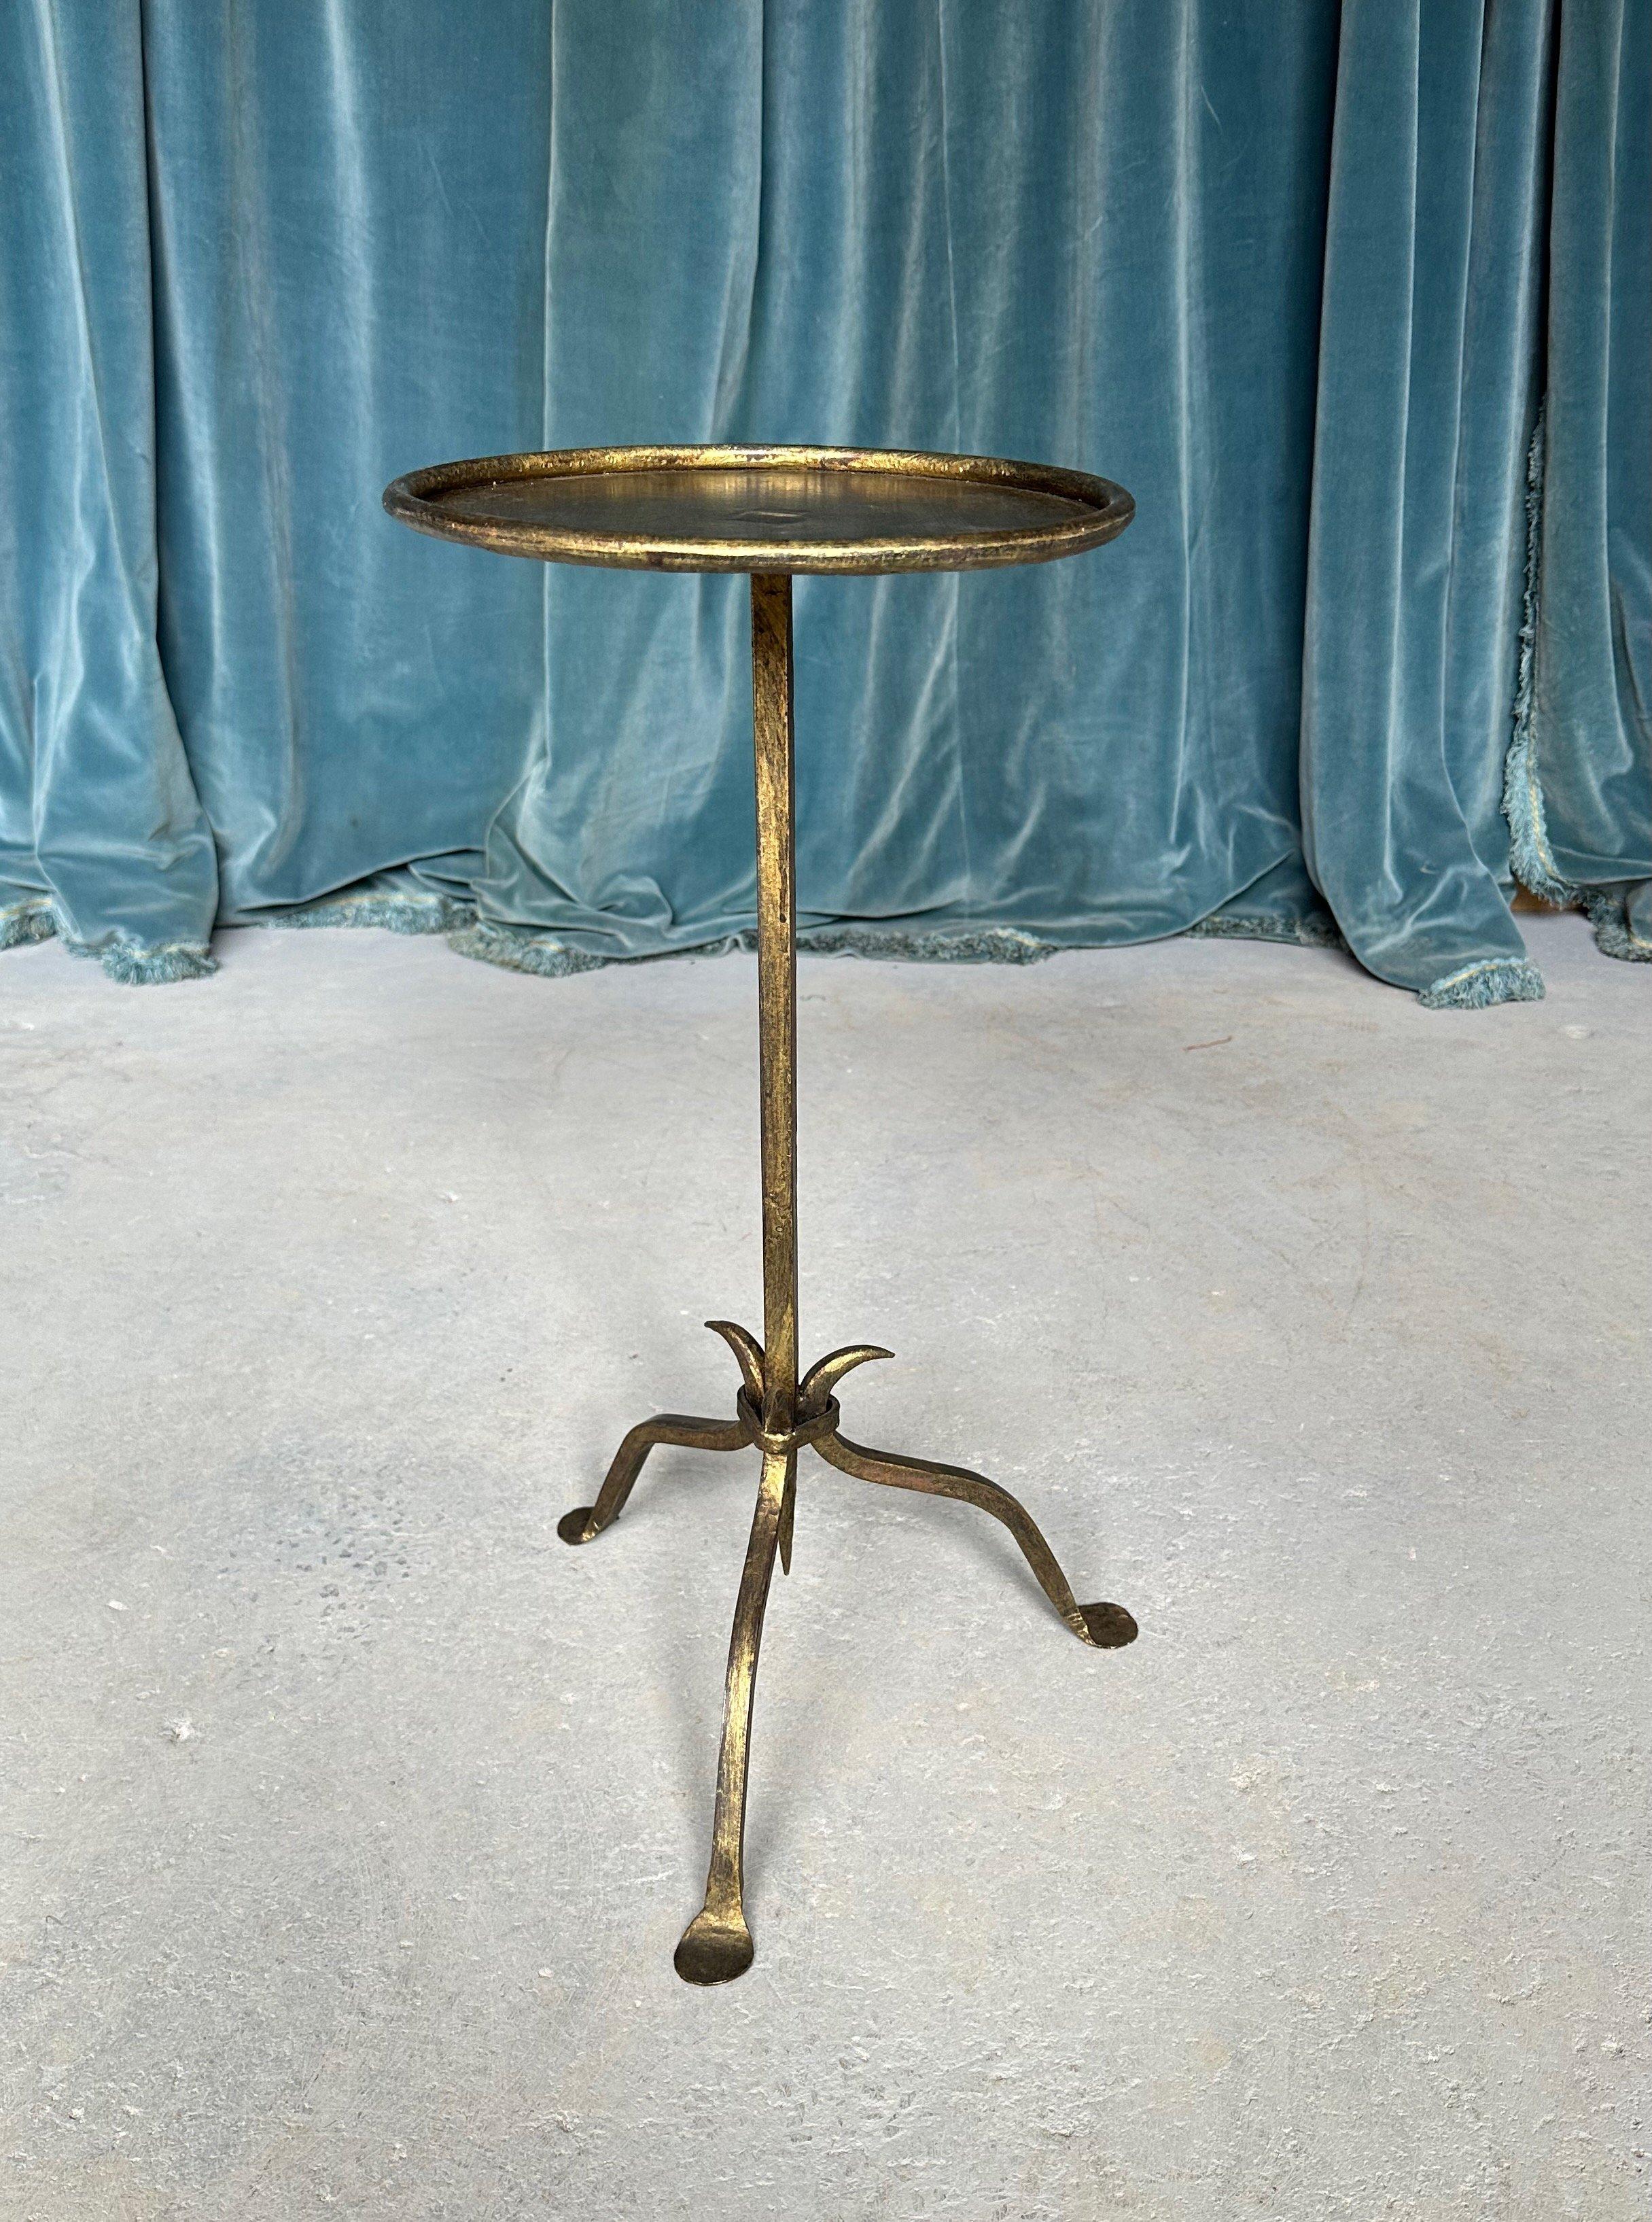 This recently fabricated Spanish iron side table features a distinctive design with a central stem that tapers to a fine point, attached to a tripod base that comprises three subtly curved legs. A rolled frame encircles the round top, providing a